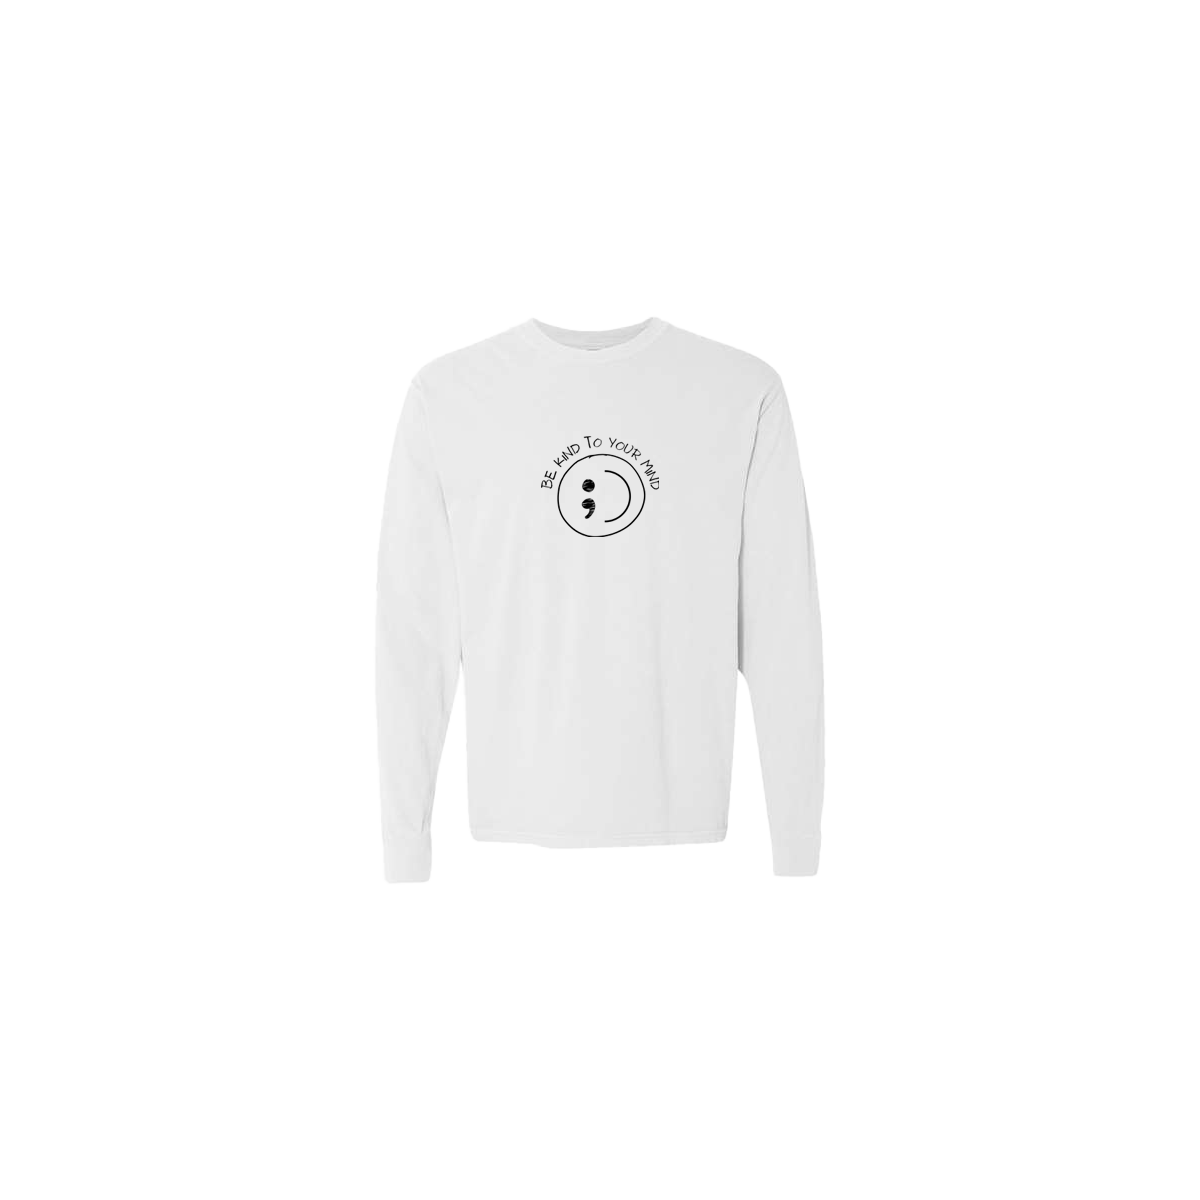 Be Kind To Your Mind Smiley Face Embroidered White Long Sleeve Tshirt - Mental Health Awareness Clothing